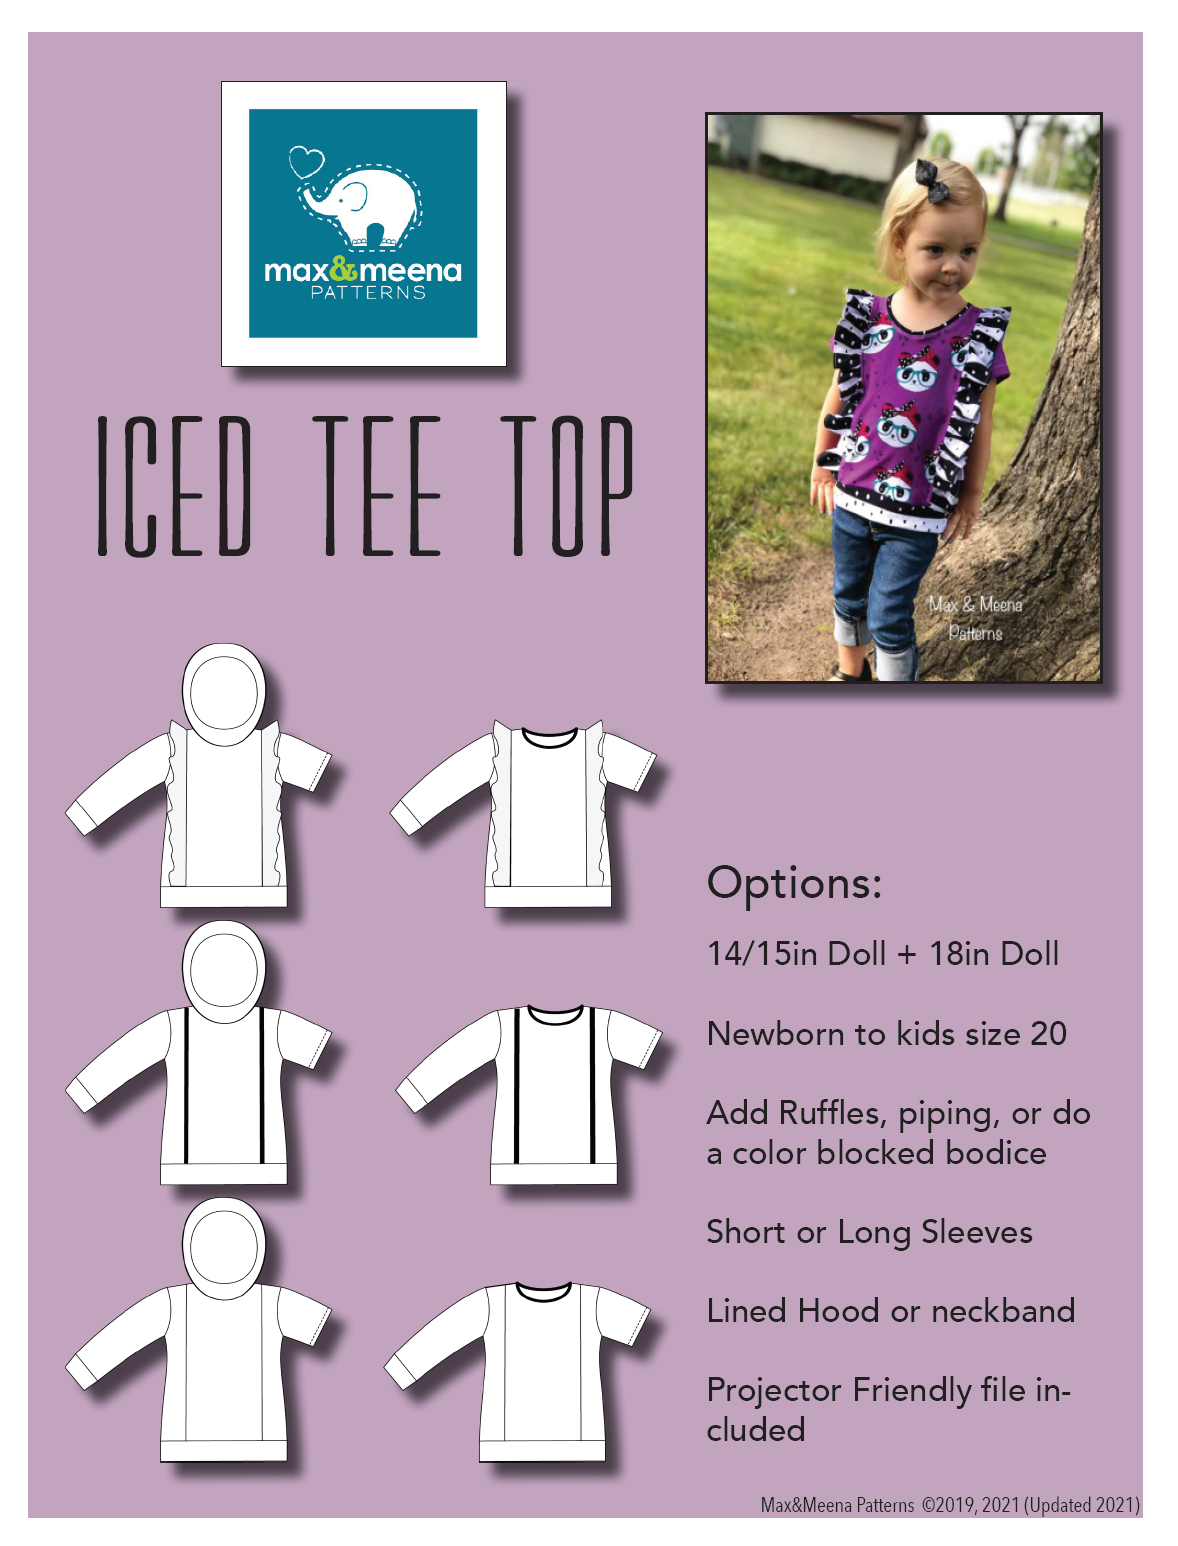 Iced Tee Top SEWING PDF PATTERN ***Projector Friendly File Included***